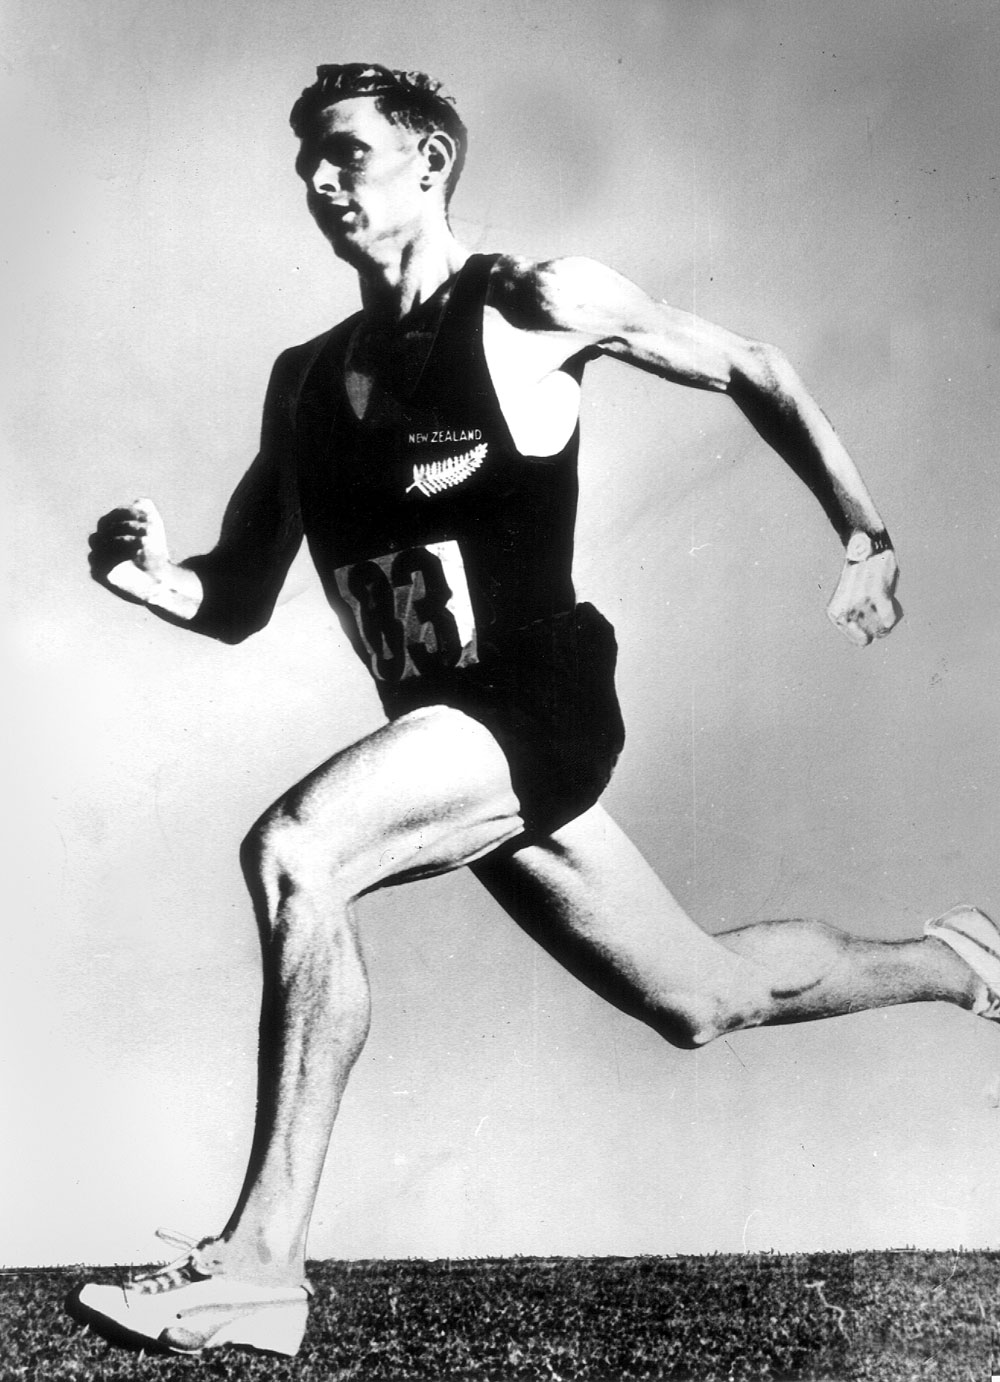 Peter Snell after breaking the World Record at Christchurch in 1962